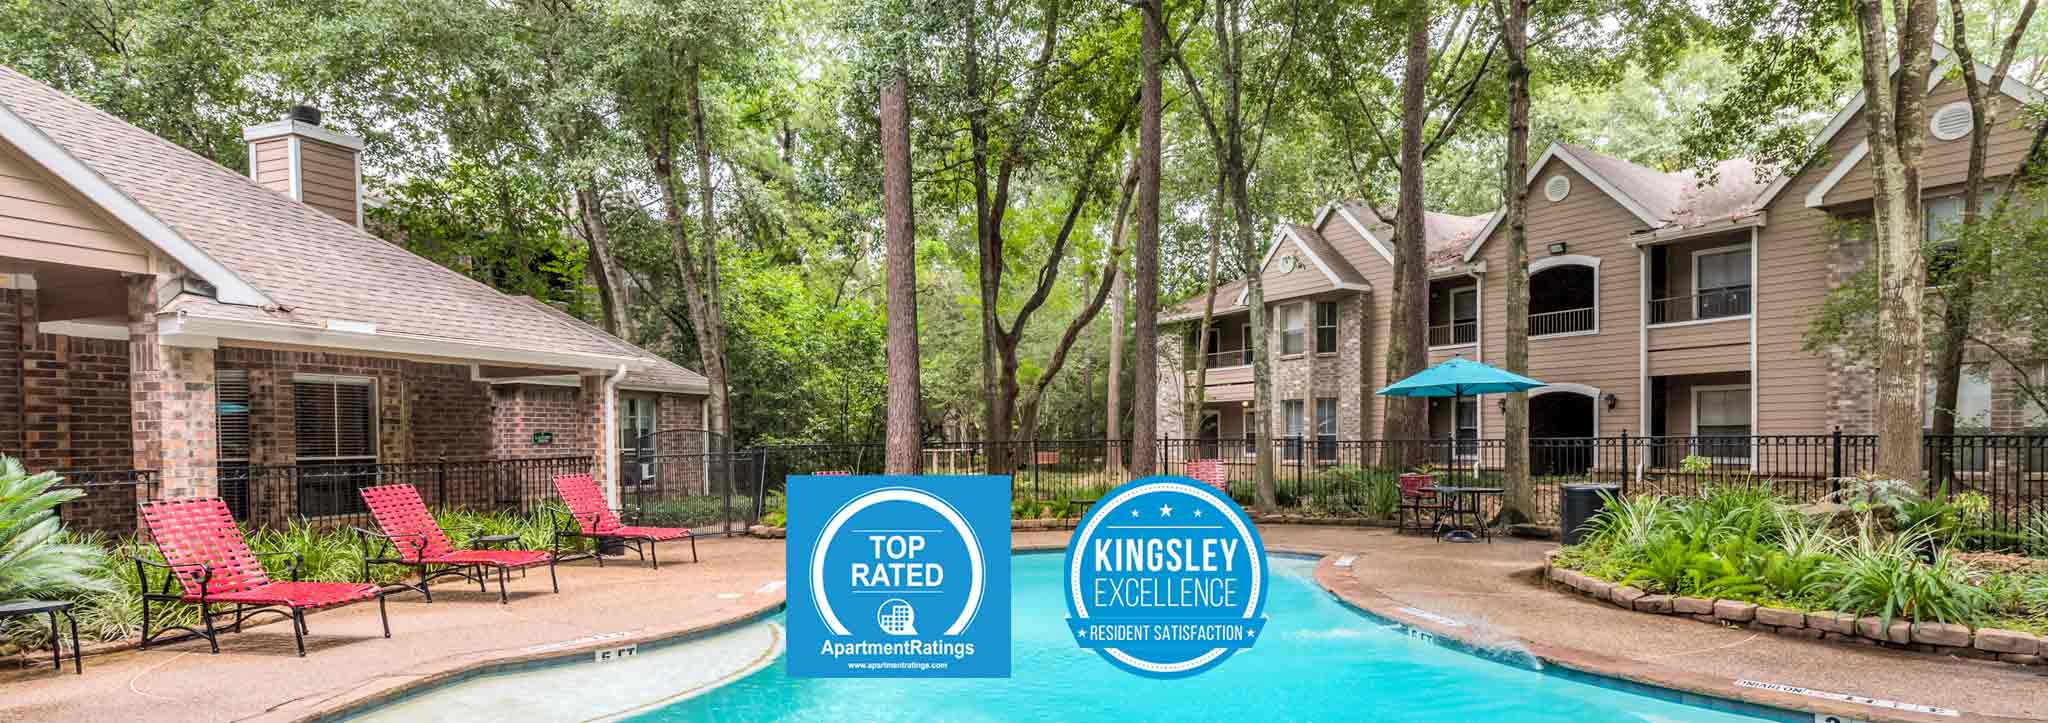 Top Rated Apartments Timber Mill The Woodlands Texas